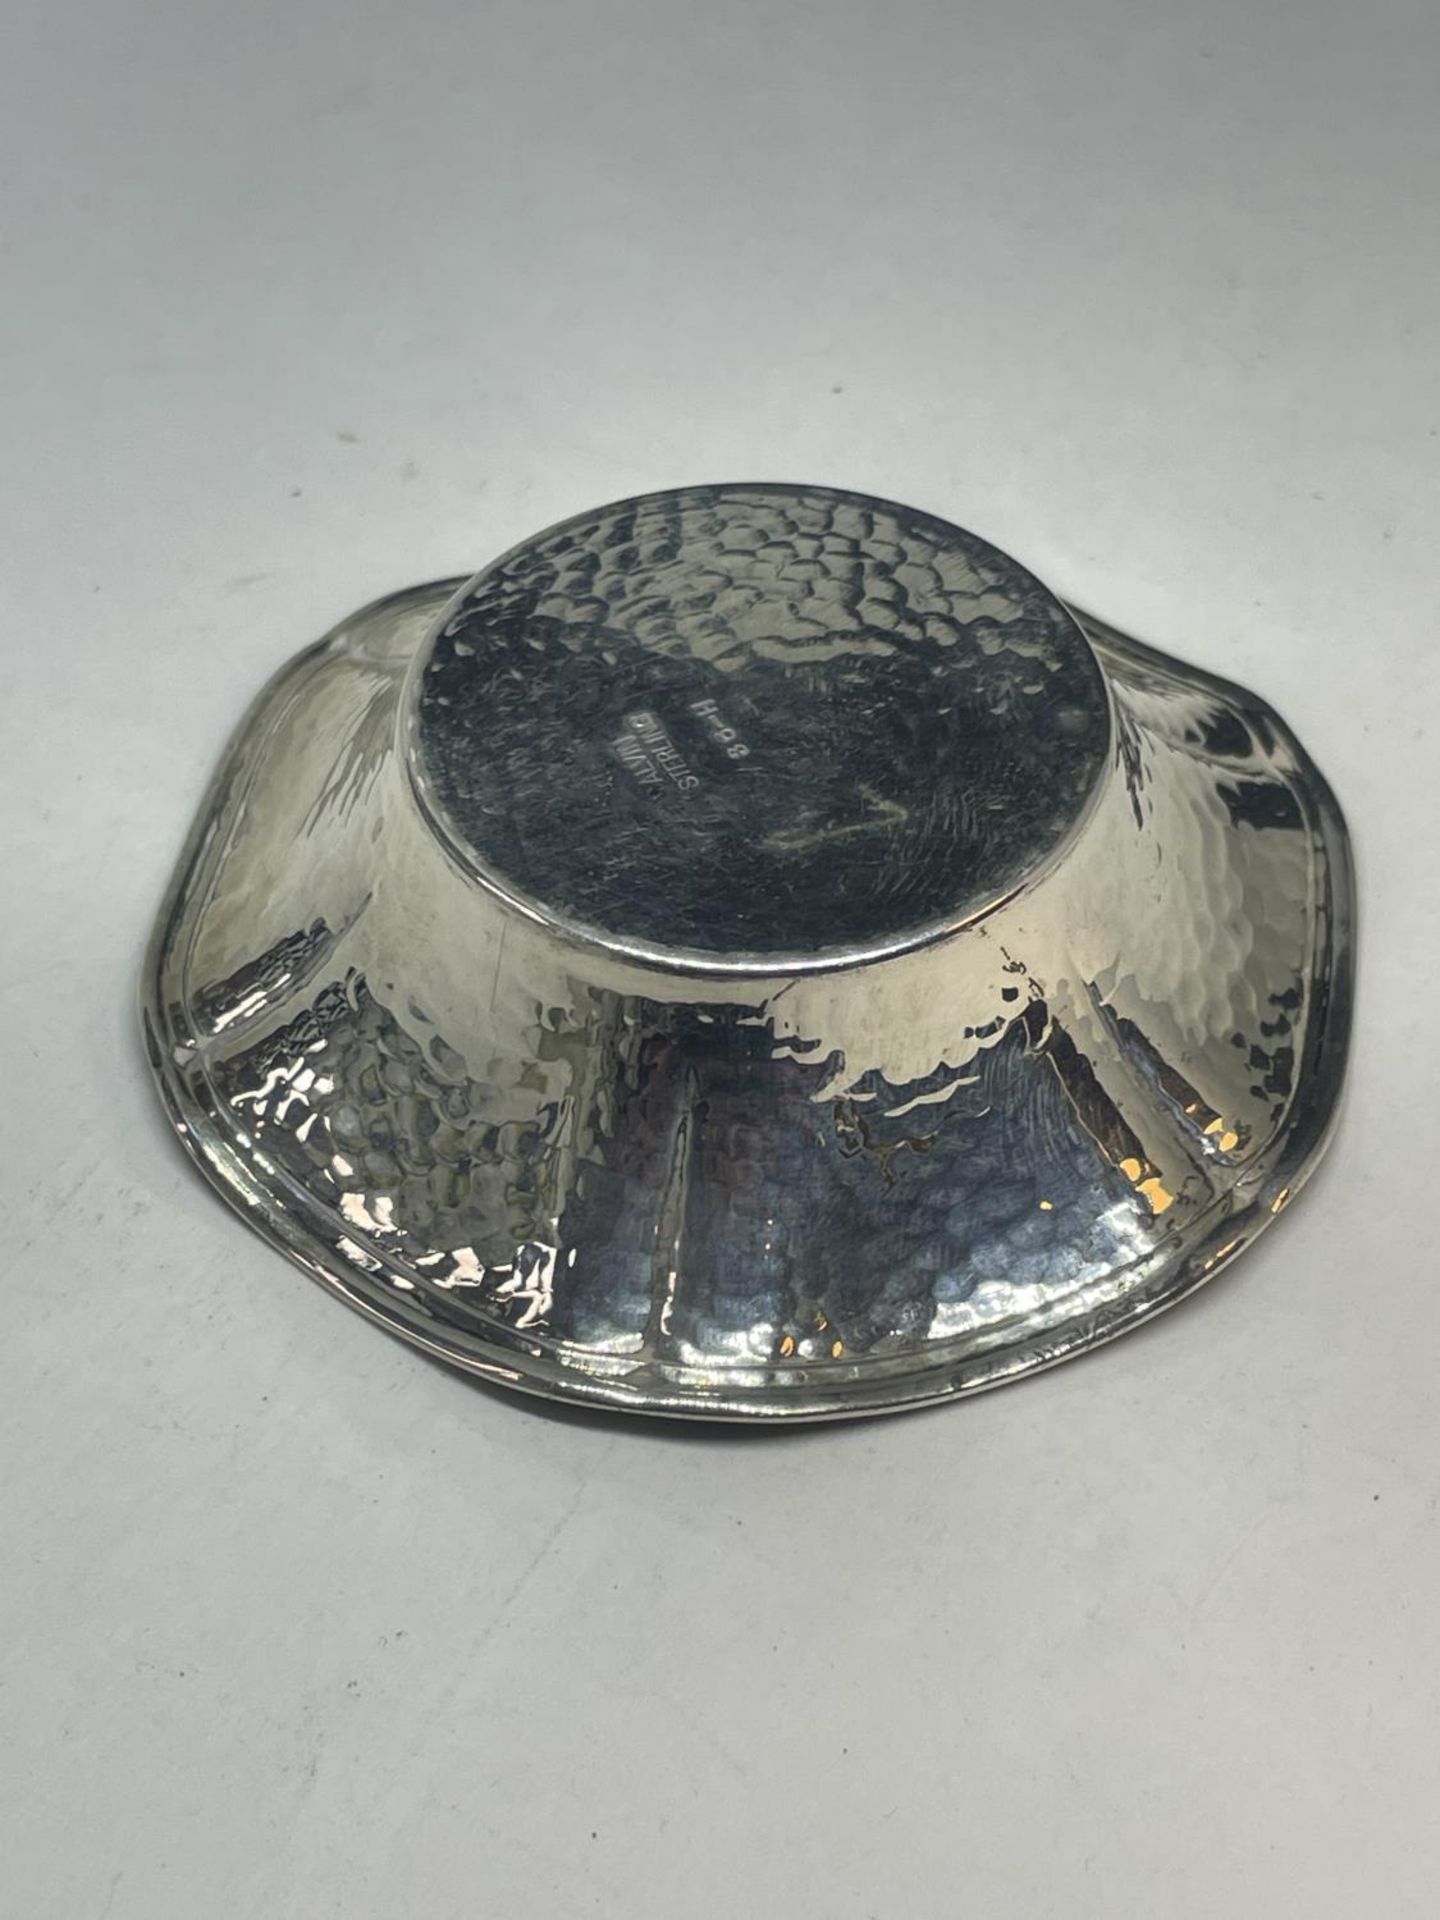 A STERLING SILVER CIRCULAR DISH GROSS WEIGHT 19.91 GRAMS - Image 2 of 3